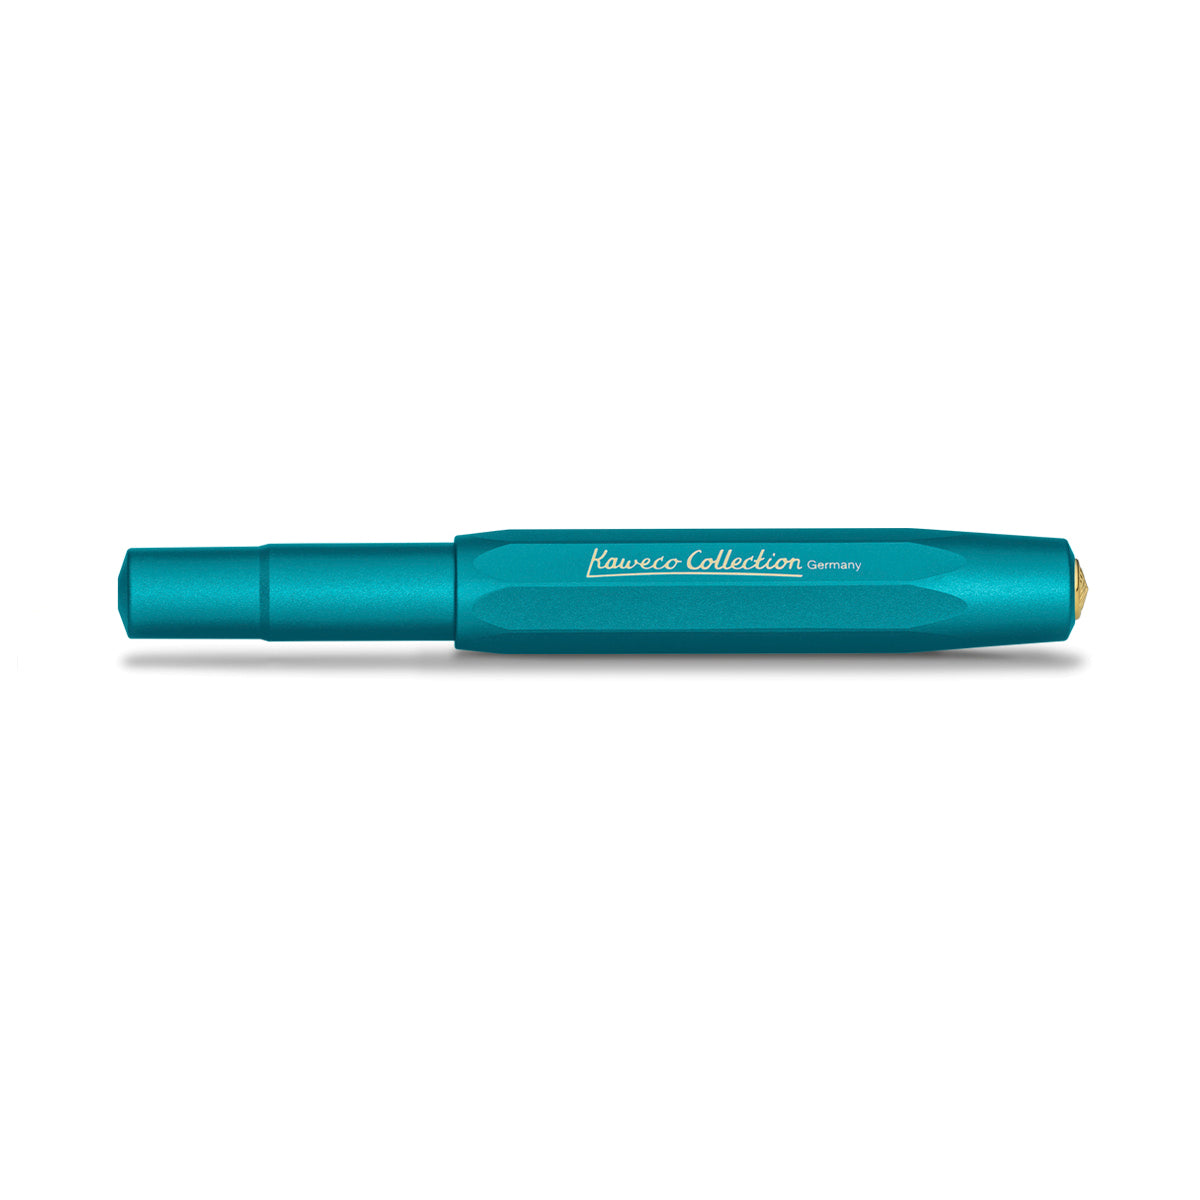 Turquoise blue-green pen with closed cap, with a gold inscription 'Kaweco Collection Germany,' placed on a white background.